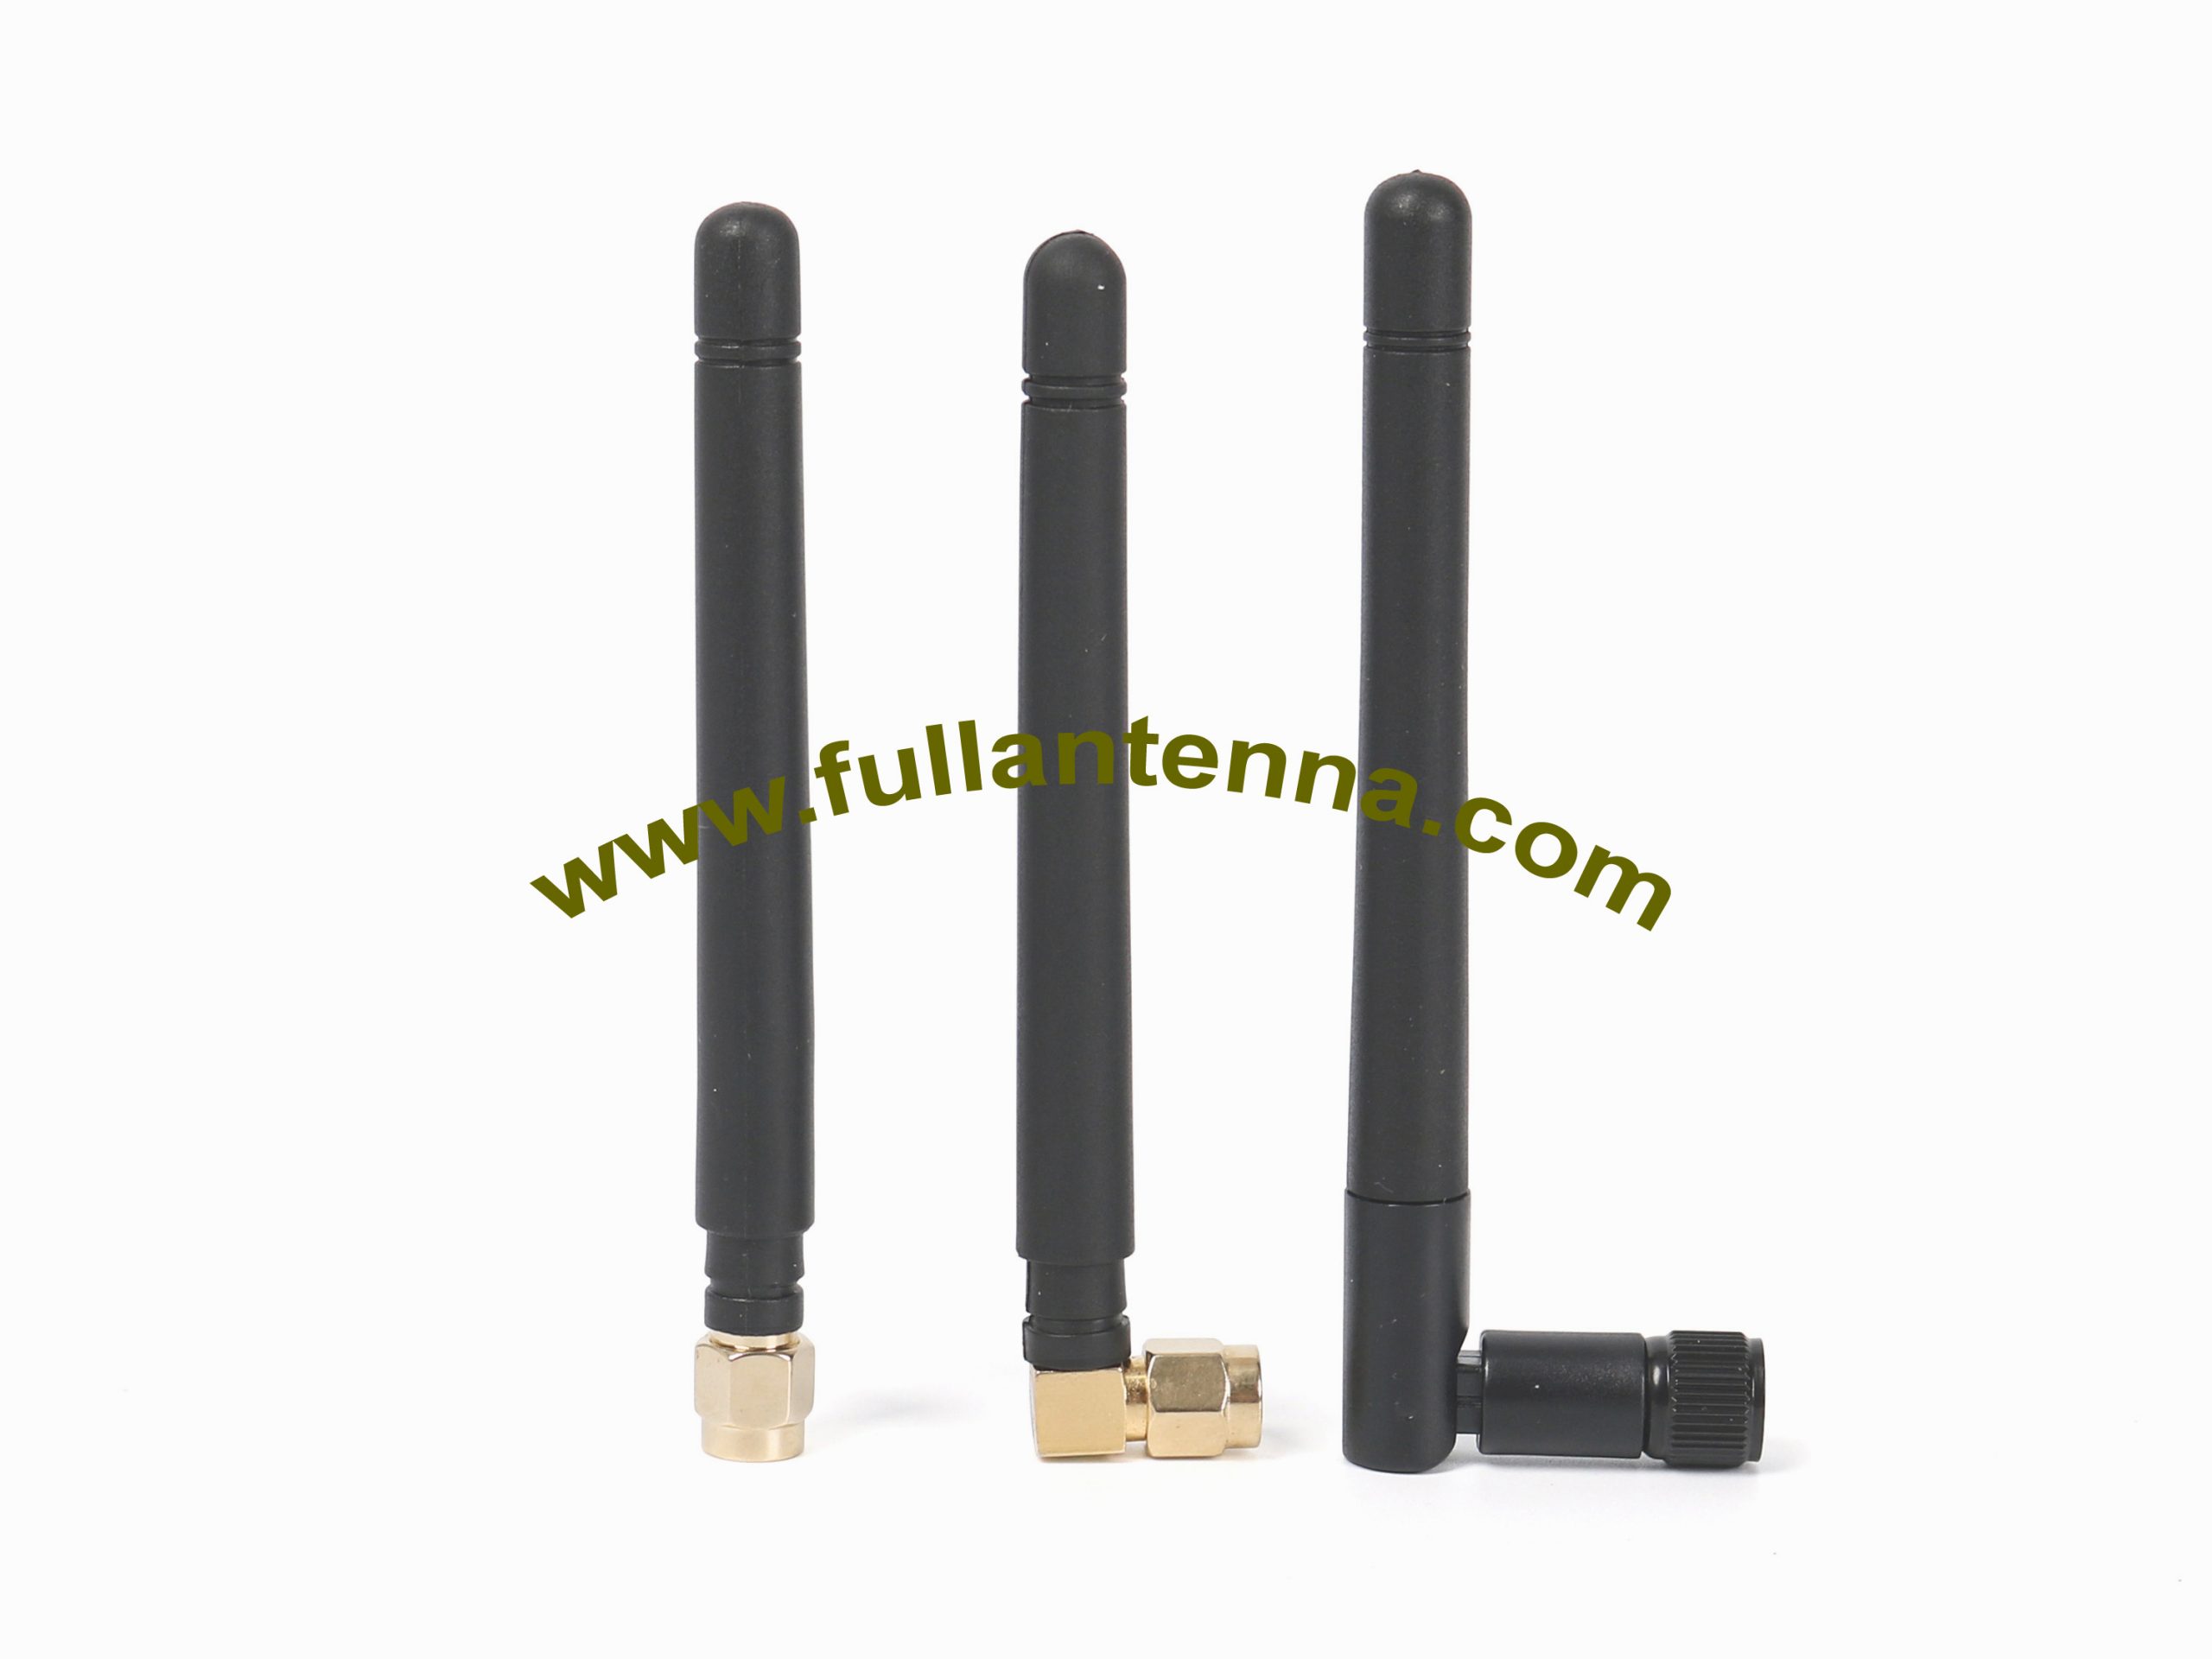 P/N:FA868.02,868Mhz Antenna,Rubber RFID antenna 868mhz frequency